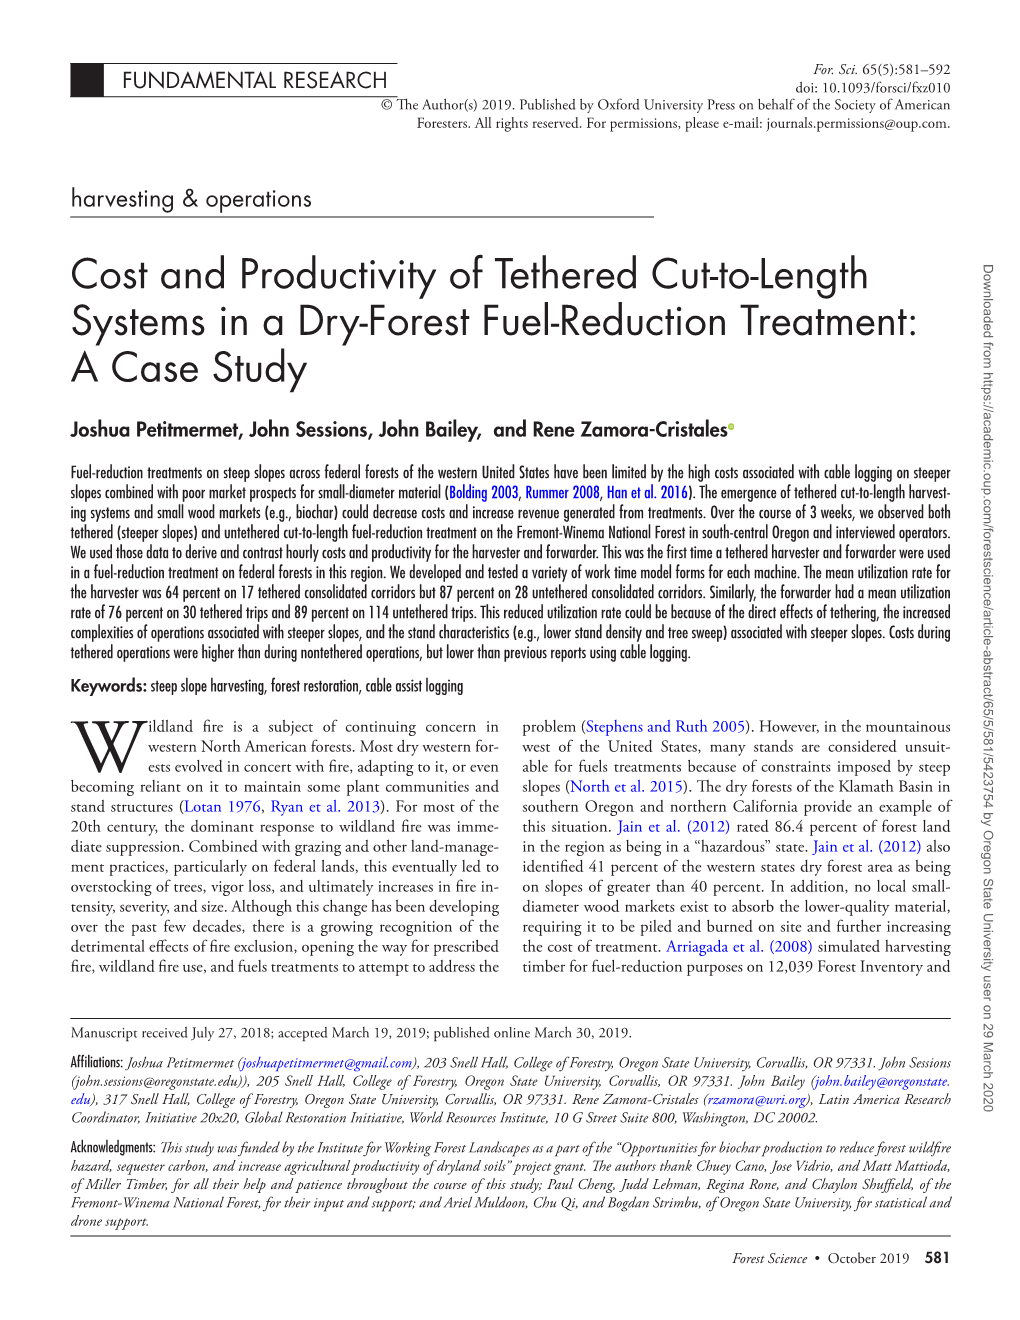 Cost and Productivity of Tethered Cut-To-Length Systems in a Dry-Forest Fuel-Reduction Treatment: a Case Study